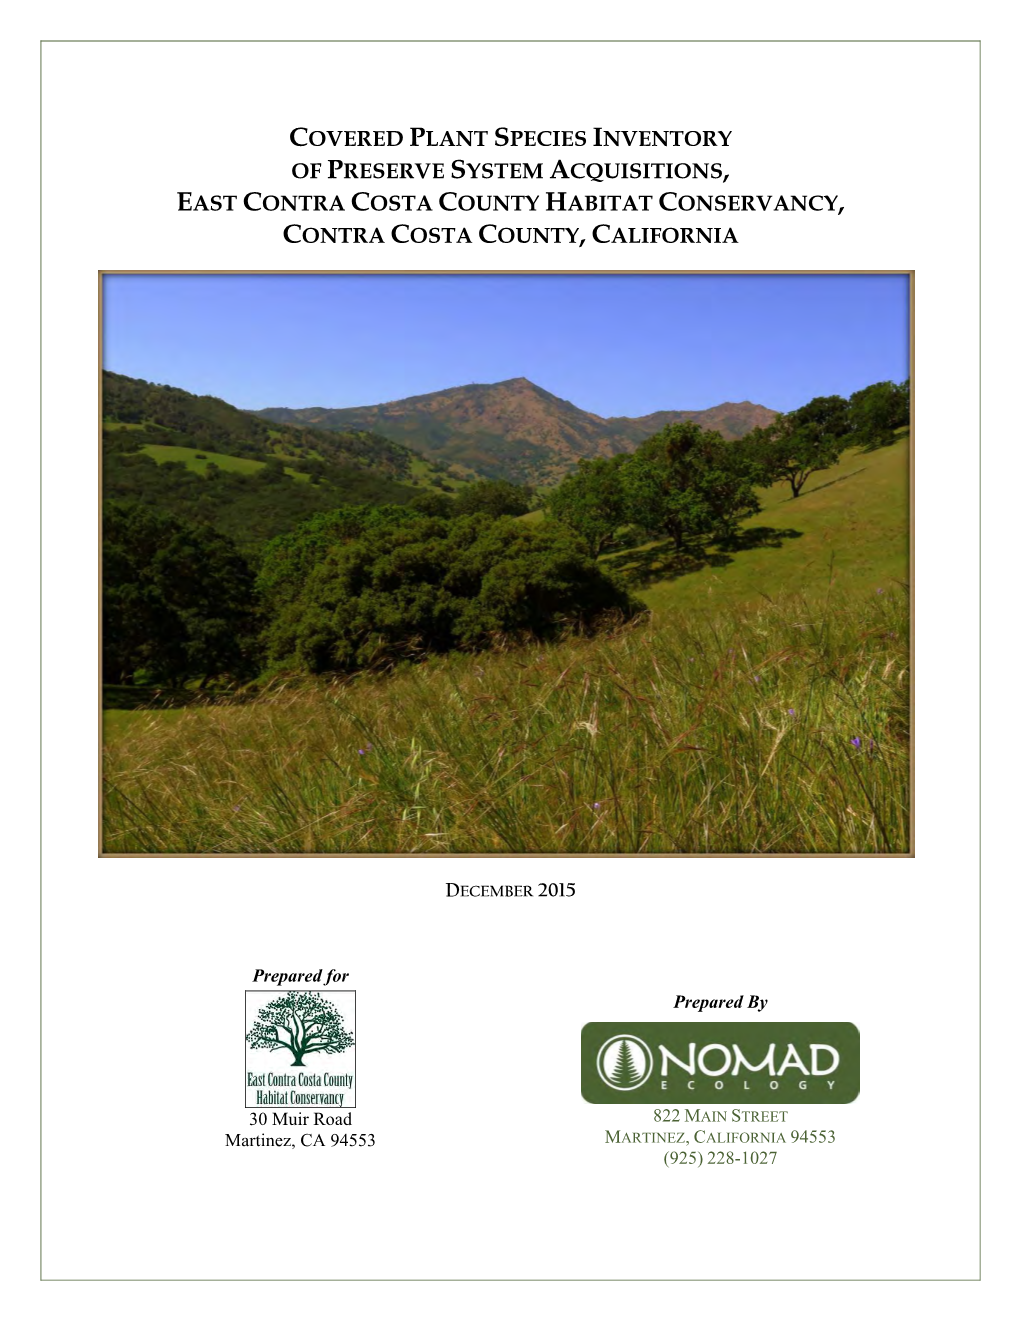 Covered Plant Species Inventory of Preserve System Acquisitions, East Contra Costa County Habitat Conservancy, Contra Costa County, California